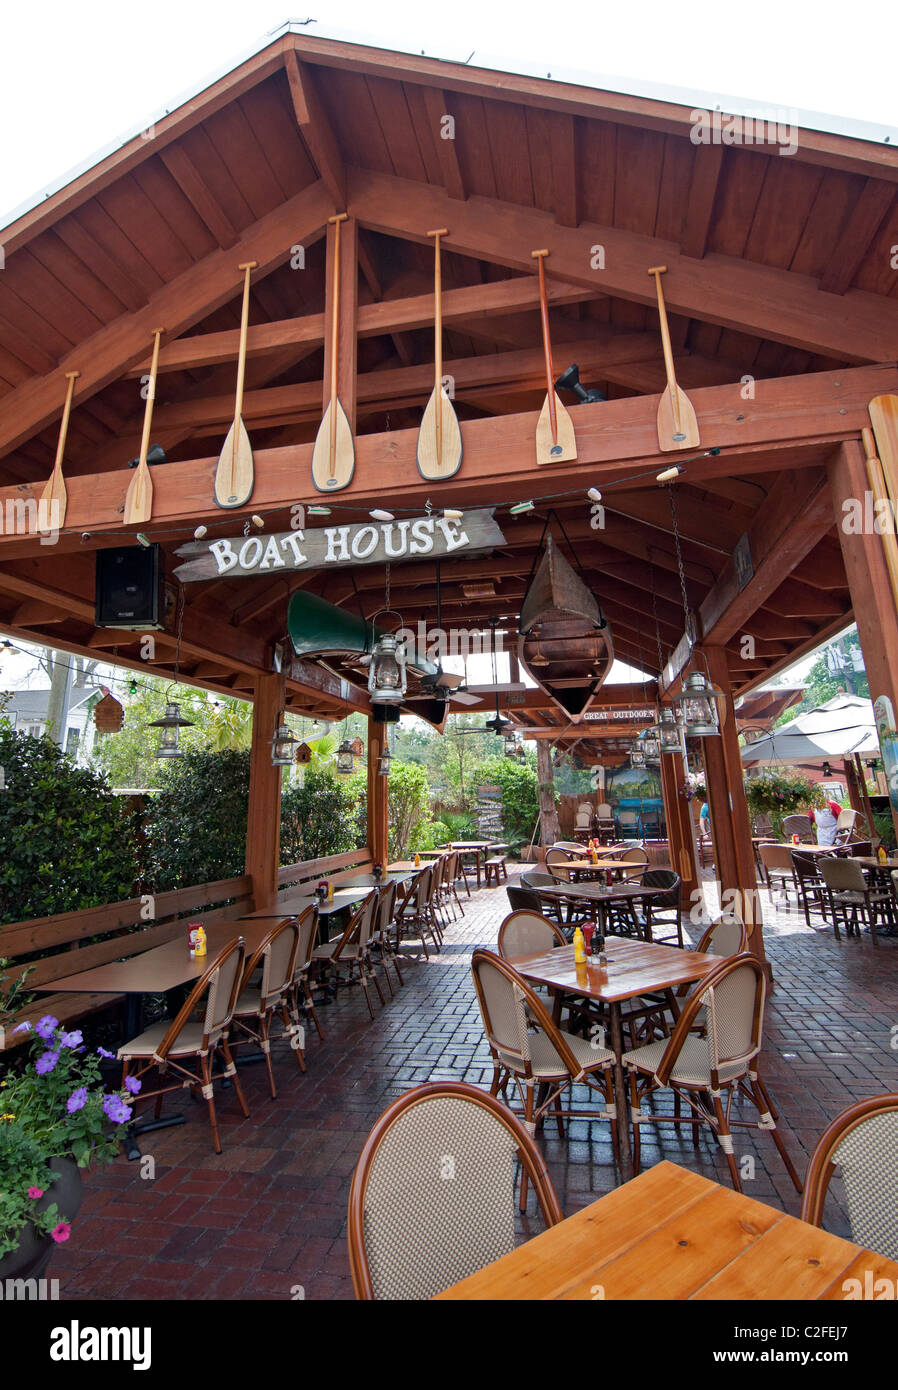 The Great Outdoors Restaurant outdoor patio area in High Springs Florida Stock Photo